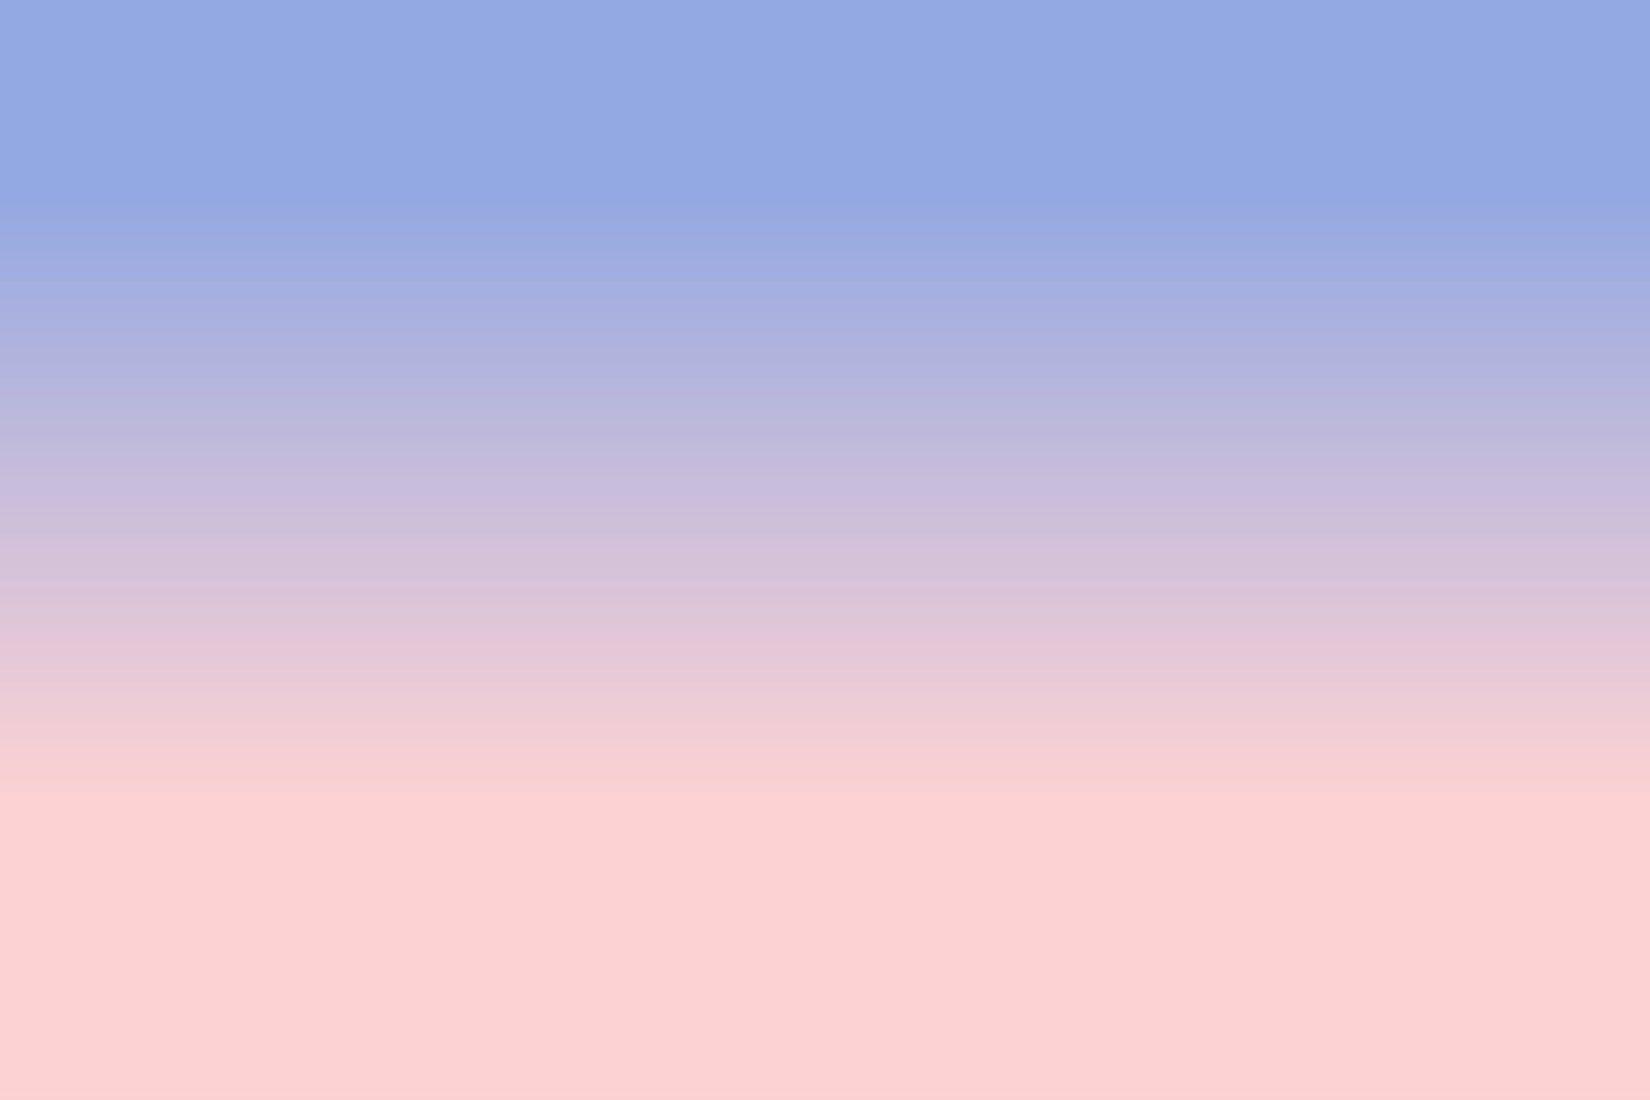 Blue and Pink Hair Fade Backgrounds - wide 3